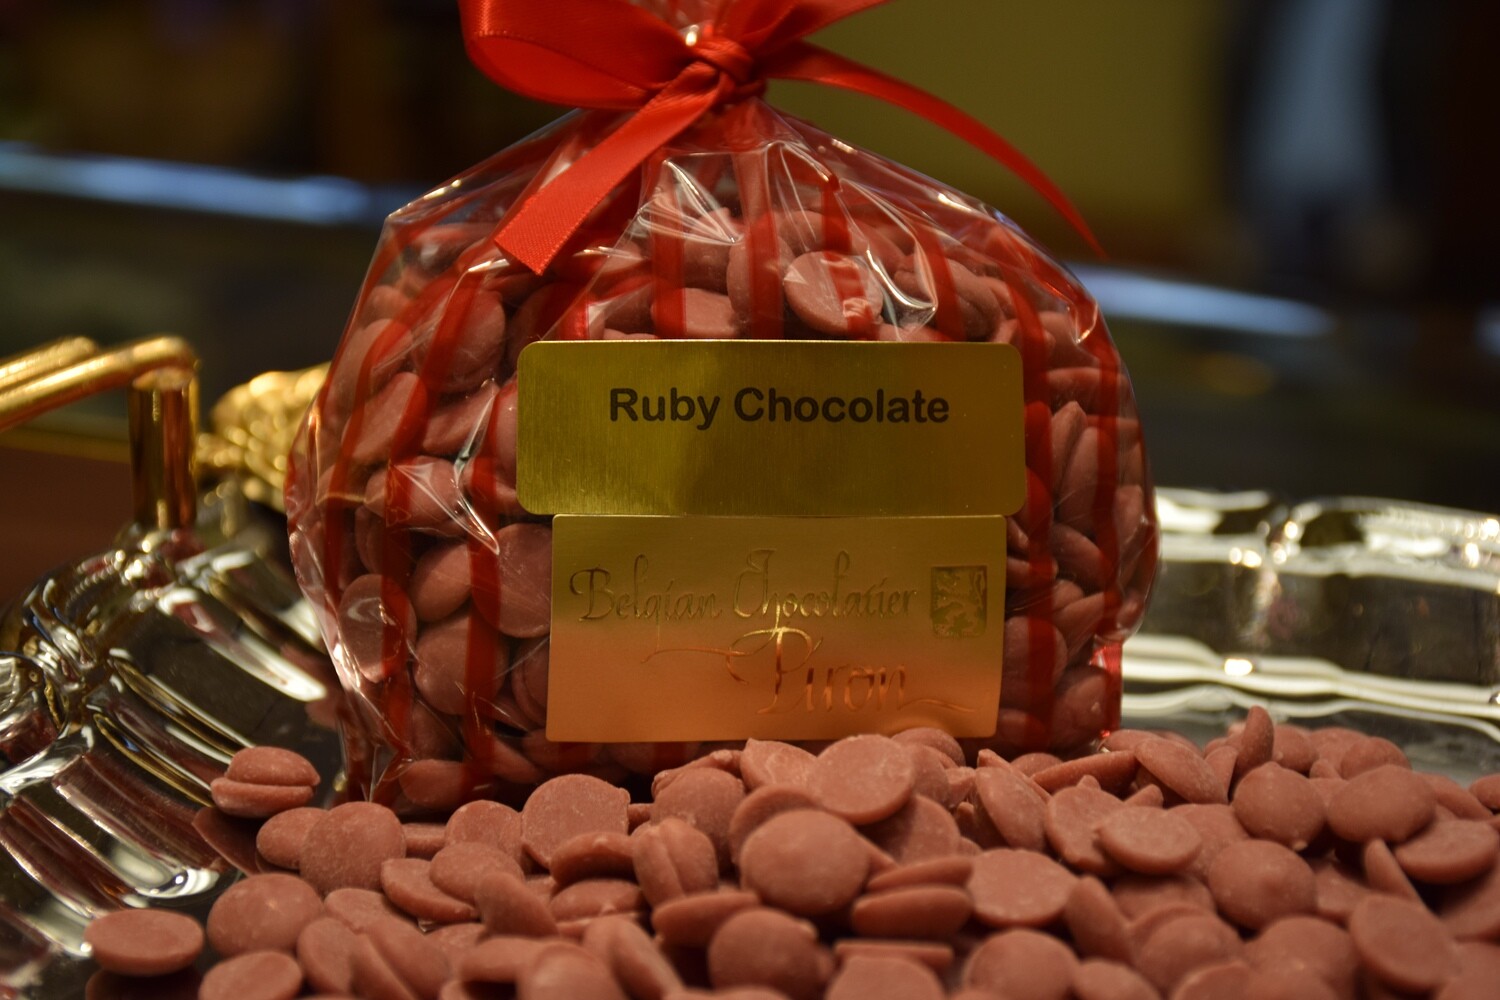 Ruby Chocolate by Callebaut